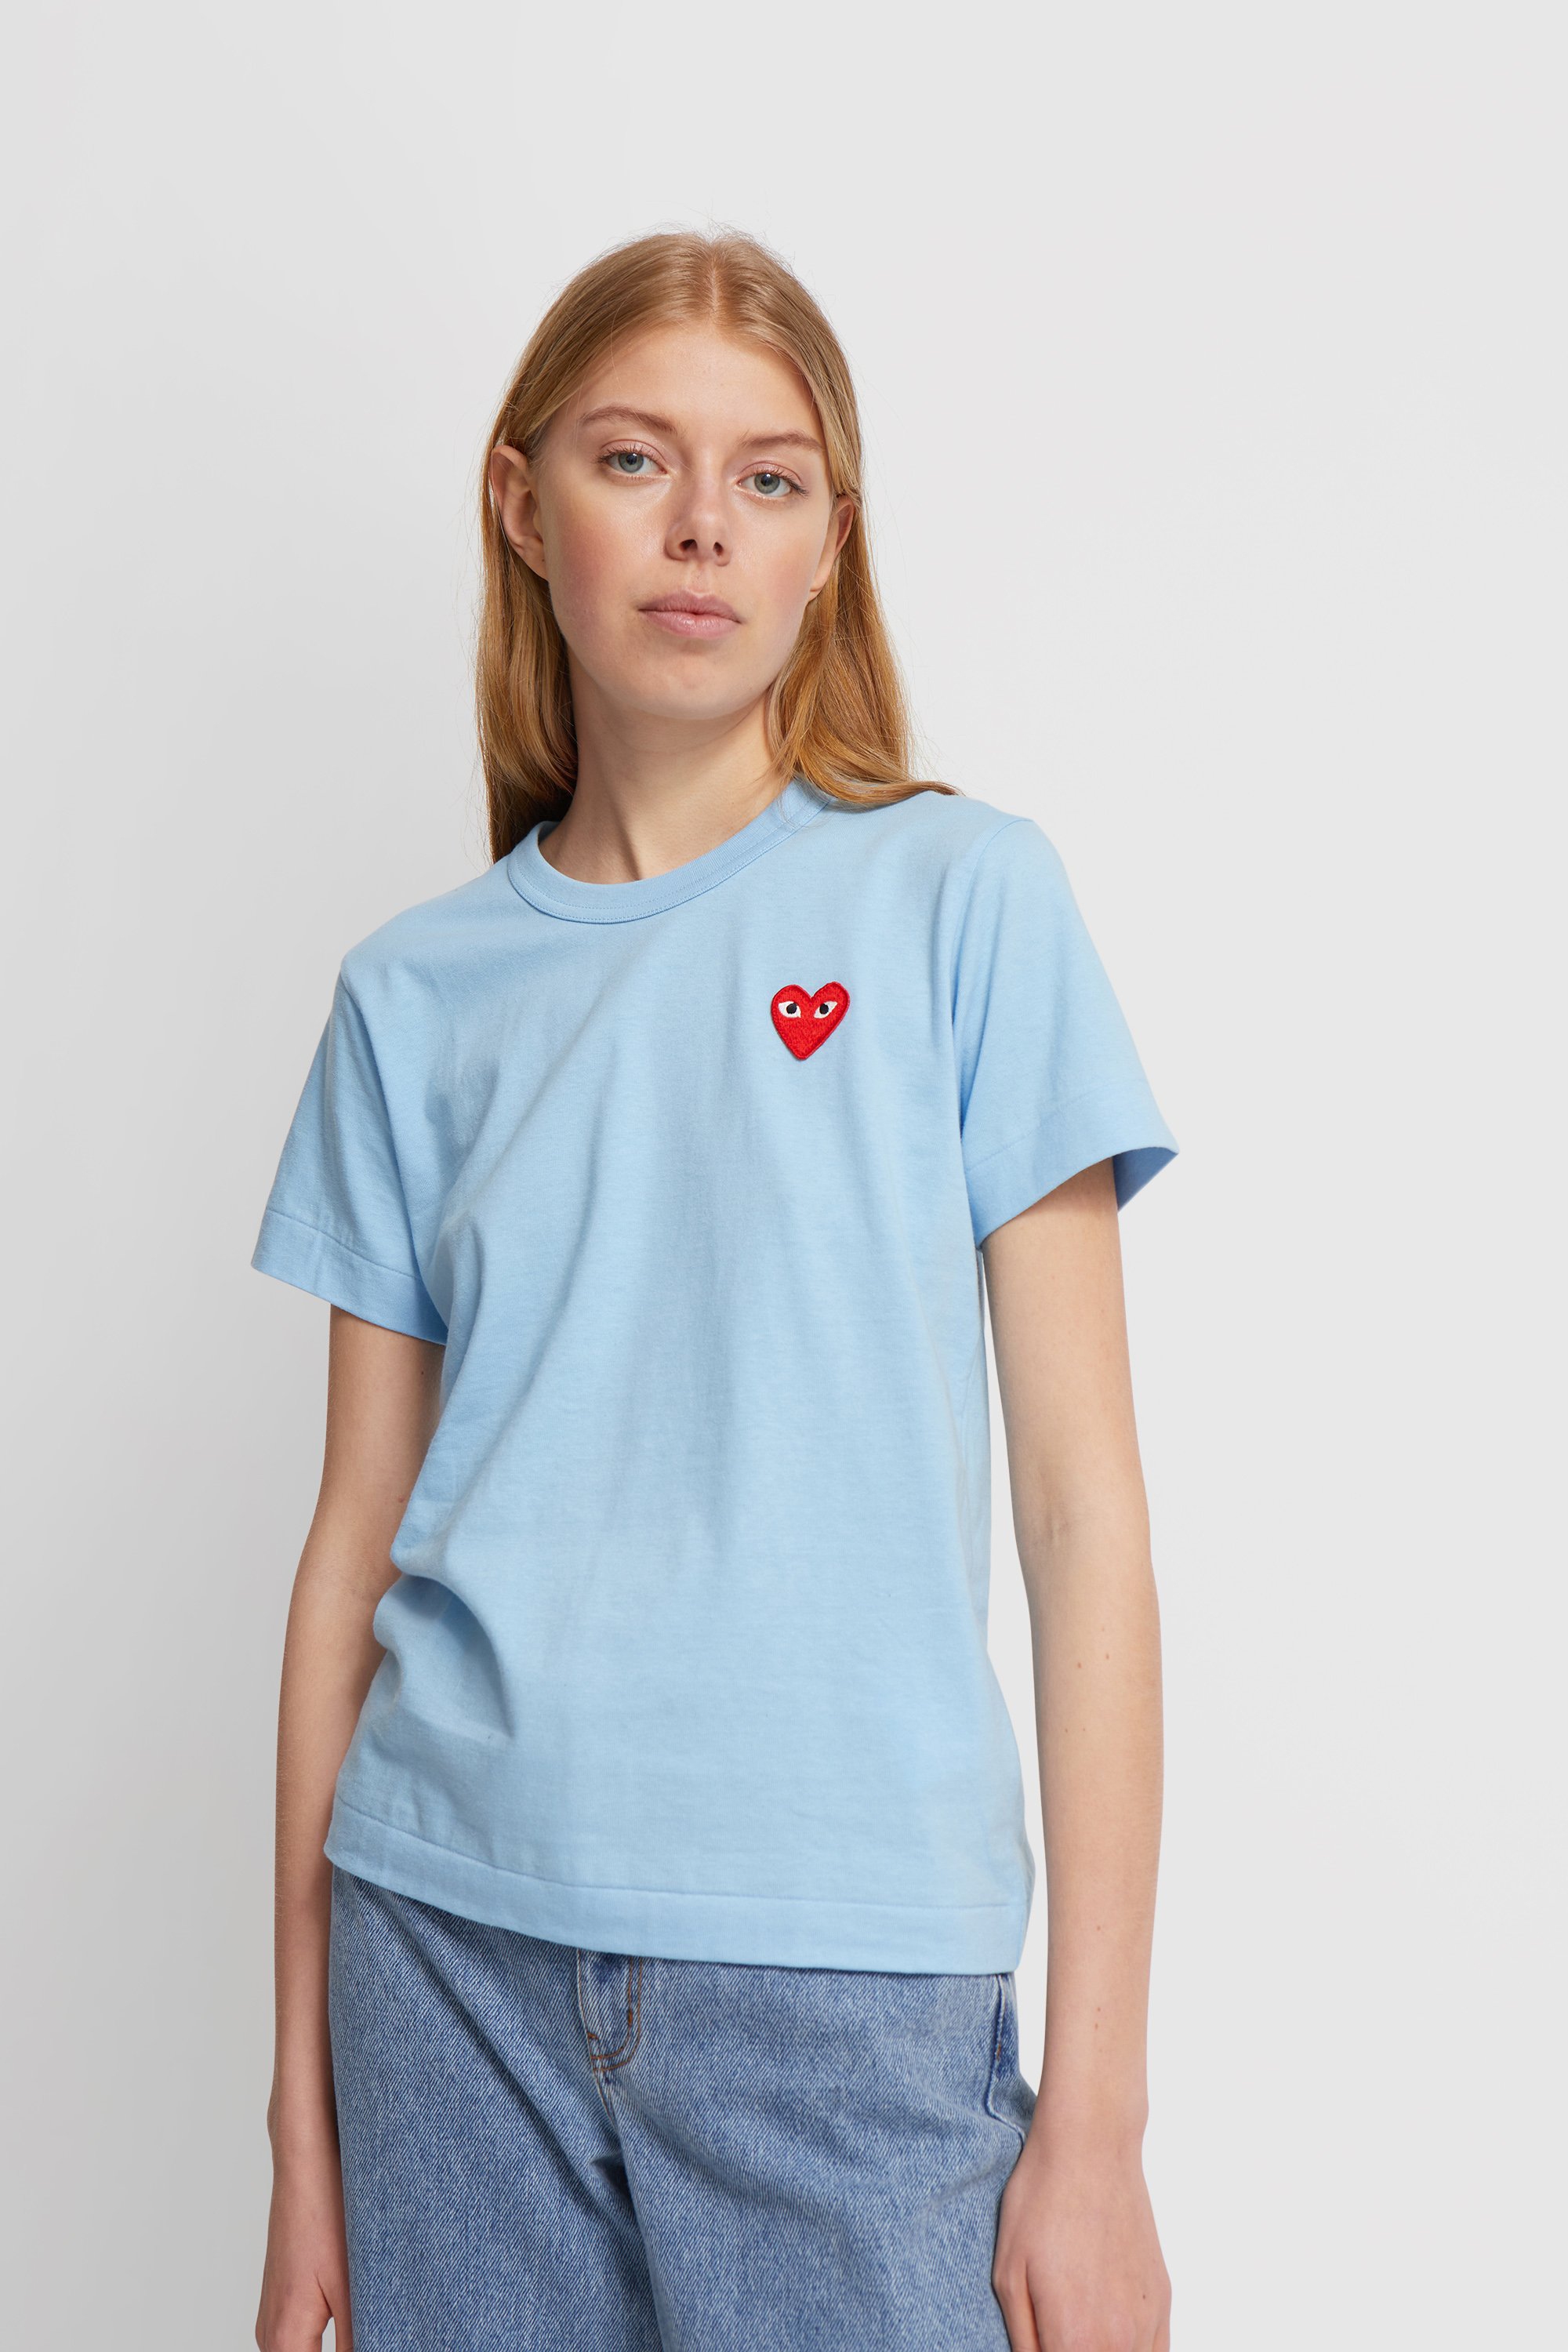 play comme des garcons womens t shirt